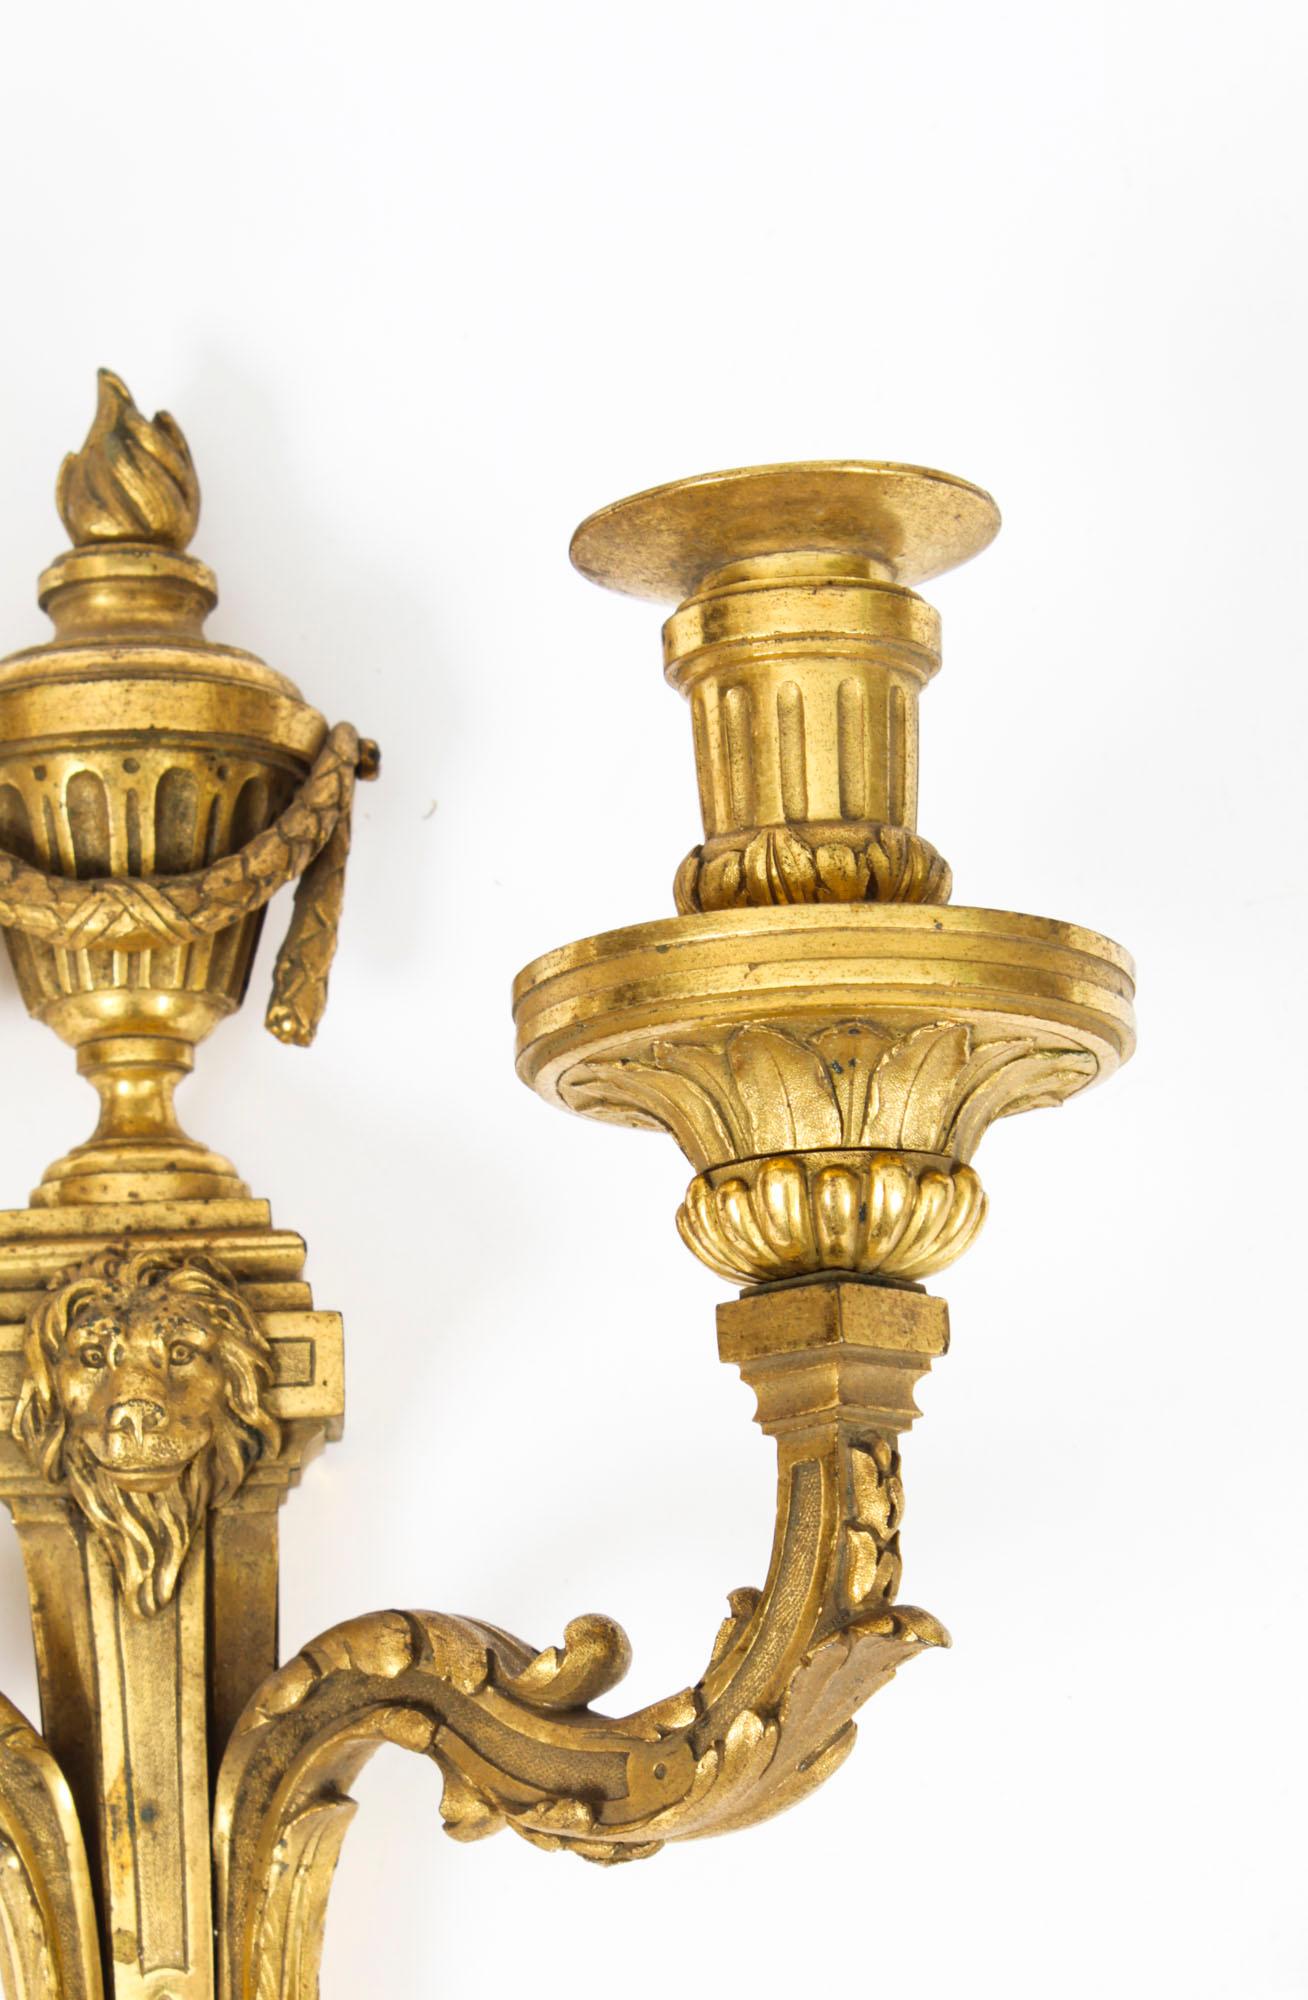 Antique Pair Regency Revival Ormolu Wall Lights Appliques Mid 19th Century For Sale 6